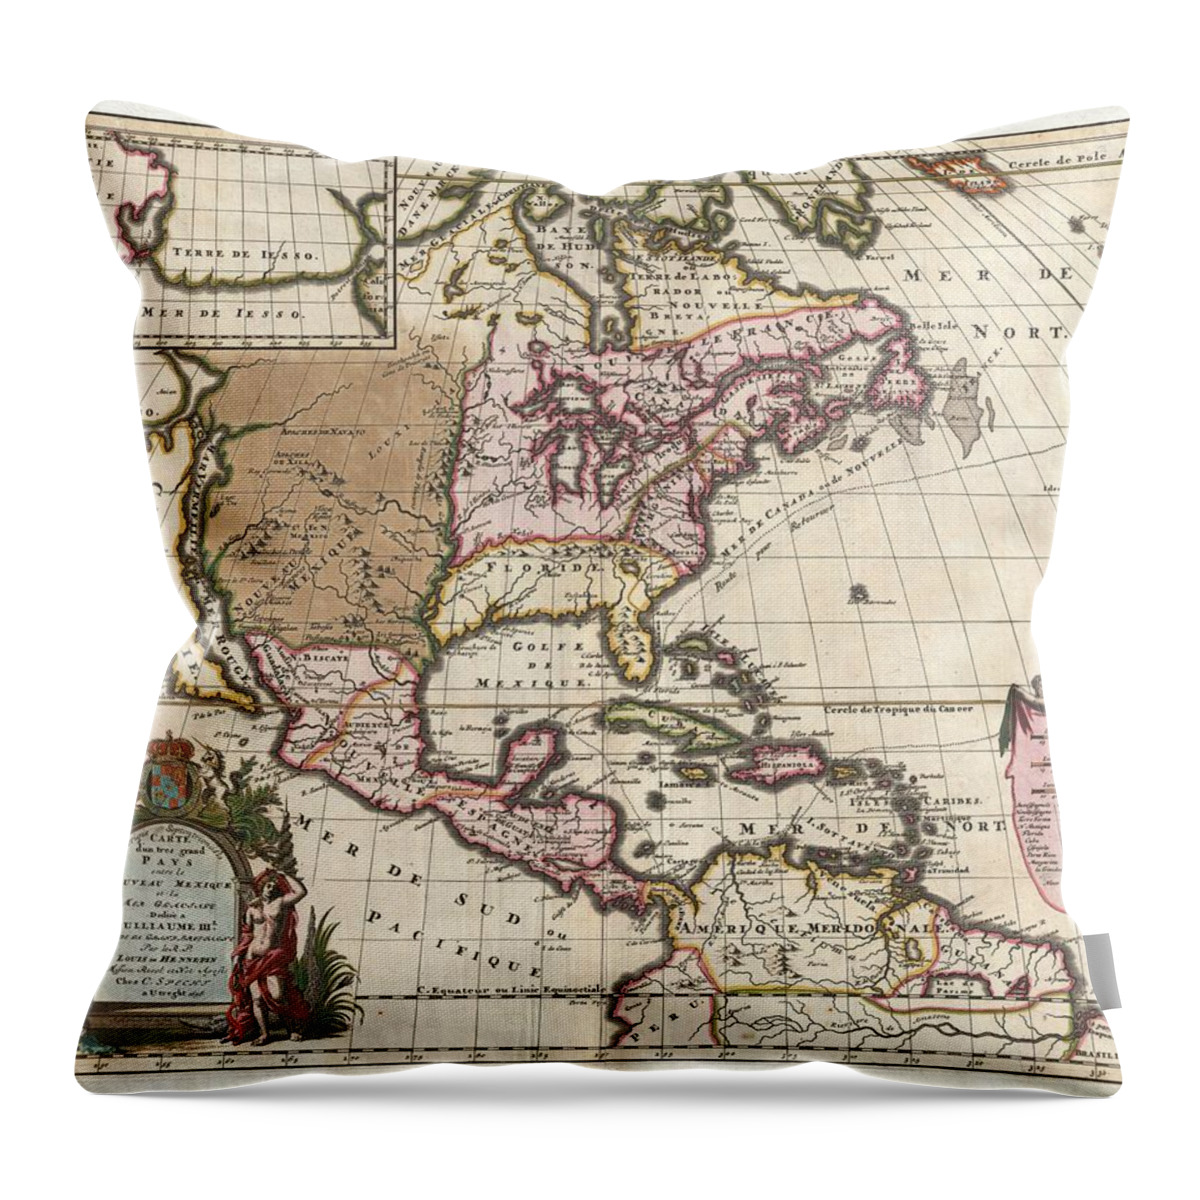 Antique Map Of North America Throw Pillow featuring the drawing Antique Maps - Old Cartographic maps - Antique Map of North America by Louis Hennepin, 1698 by Studio Grafiikka